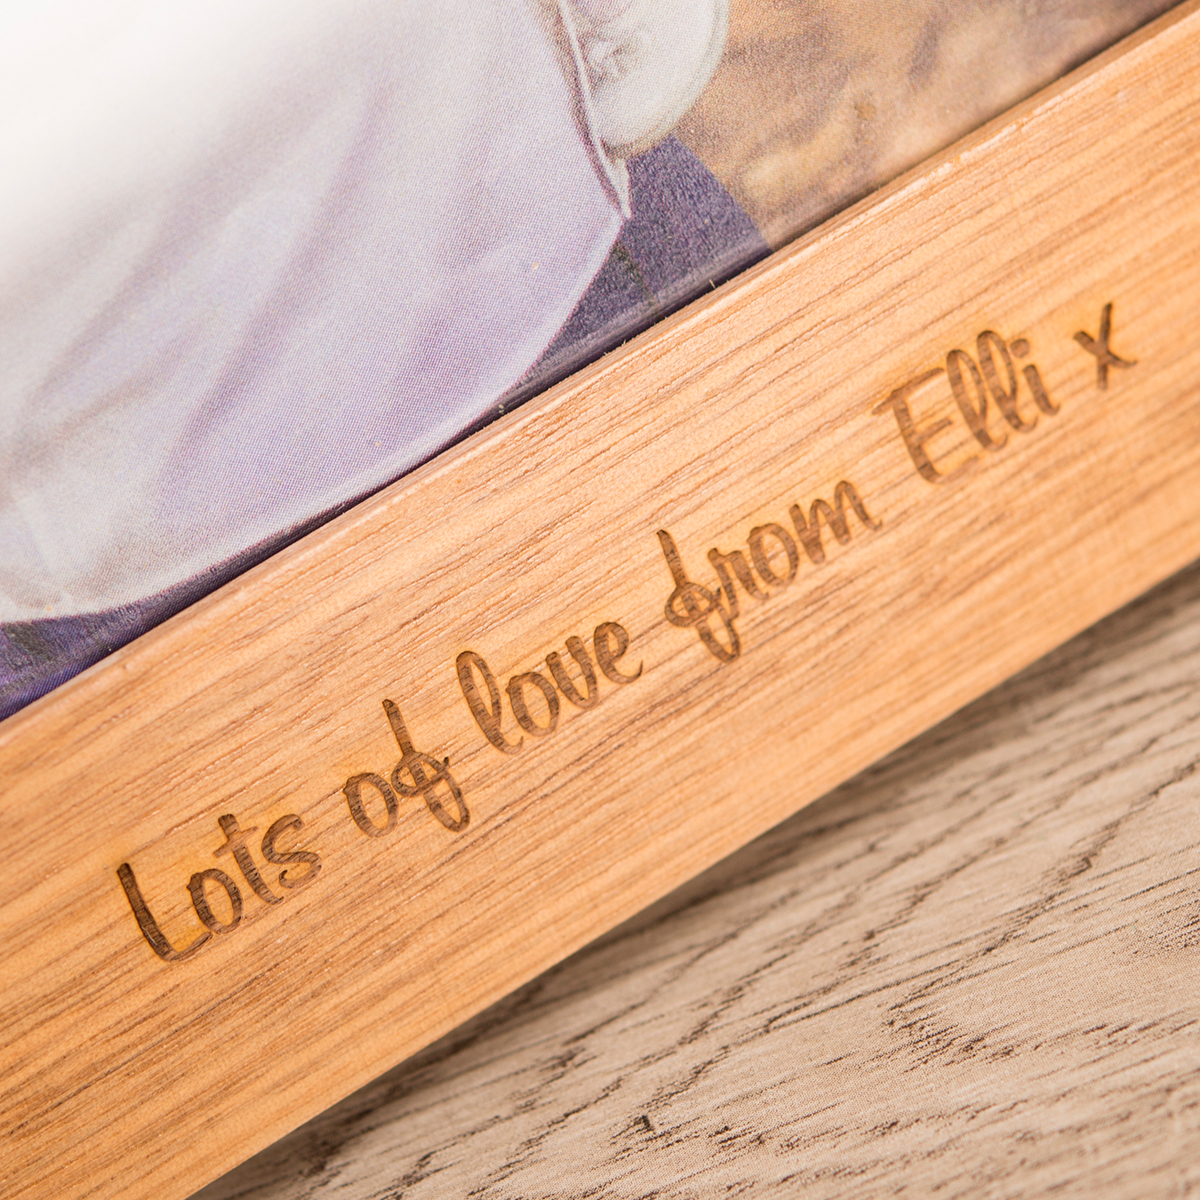 Personalised Engraved Wooden Photo Frame - Forever My Dad